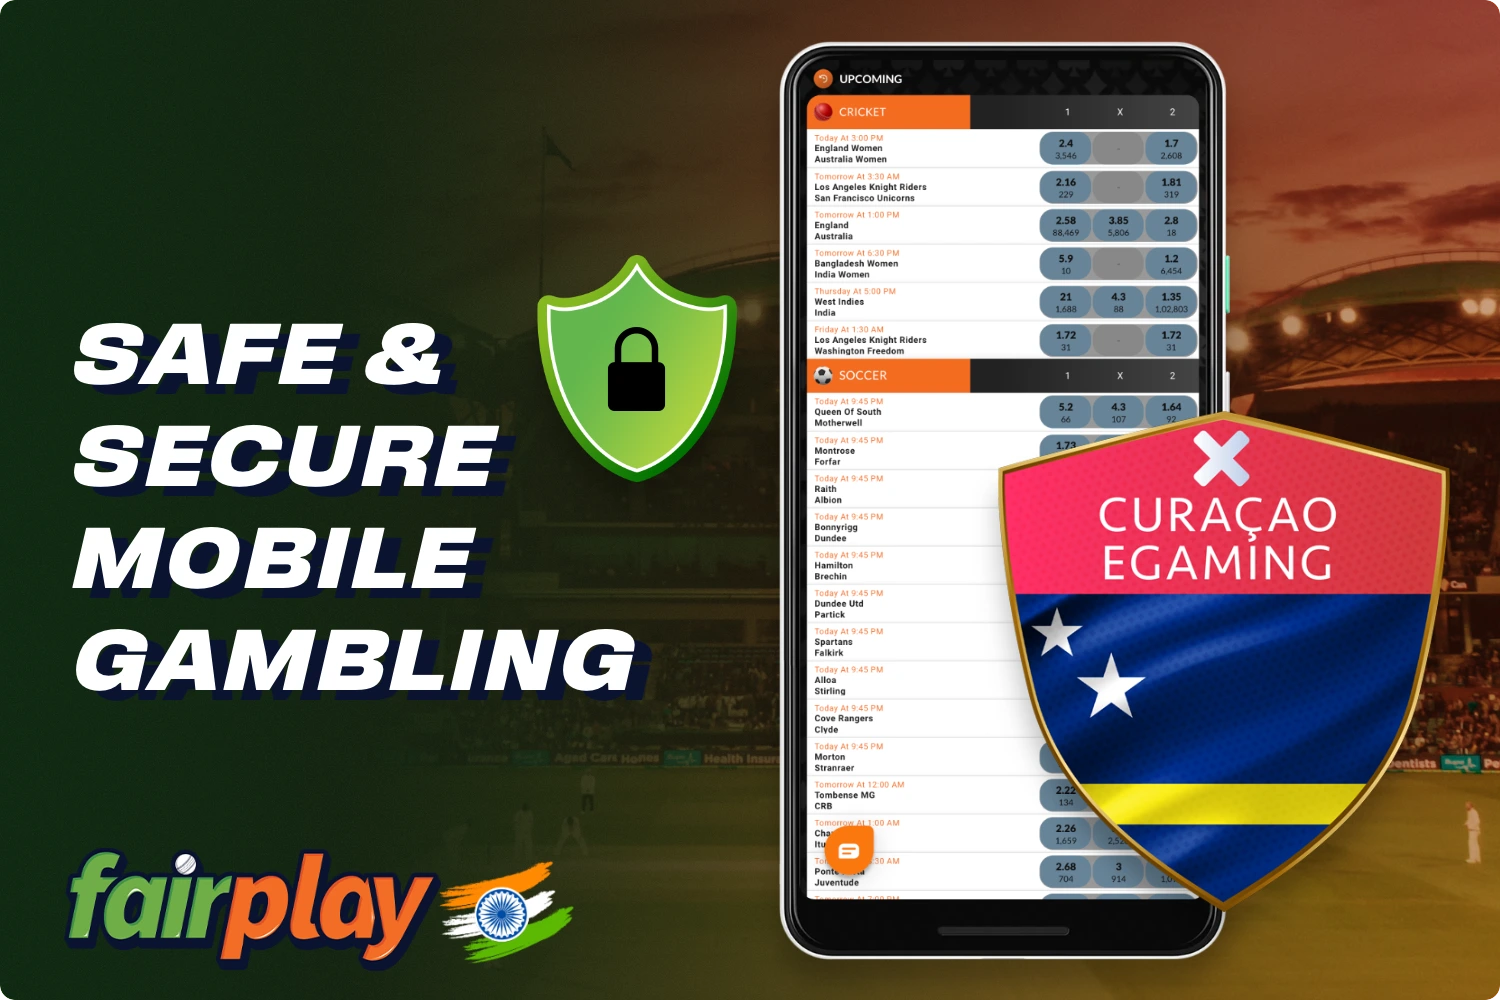 The Fairplay mobile app is completely safe for users, and is protected in all the same ways as the official website